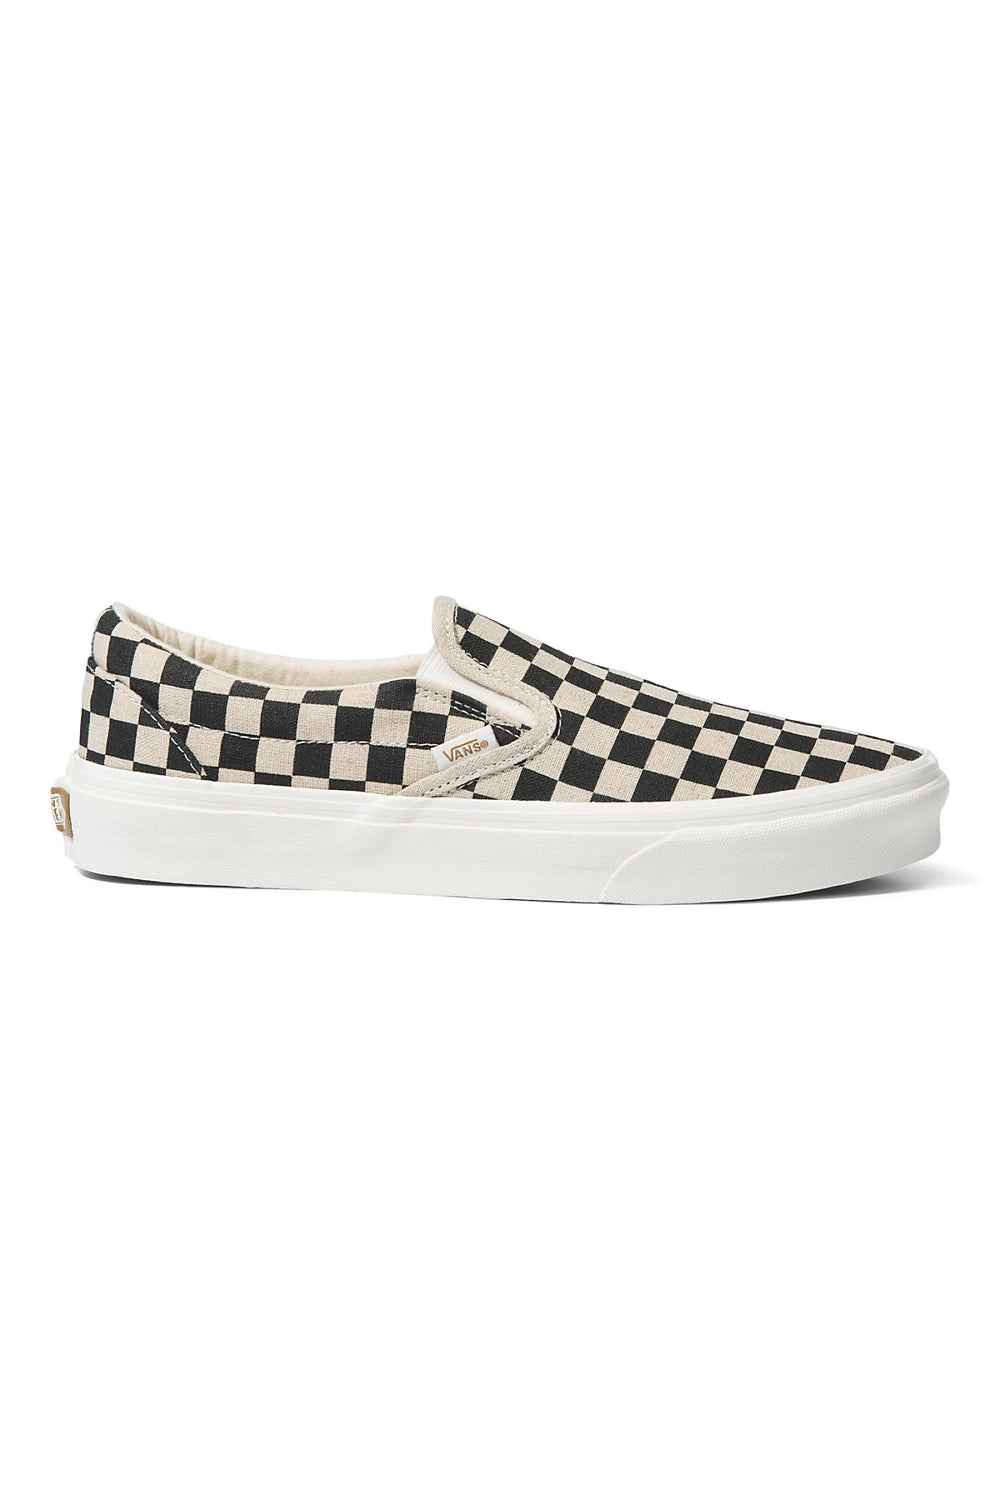 Natural Eco Theory Checkerboard Slip-On